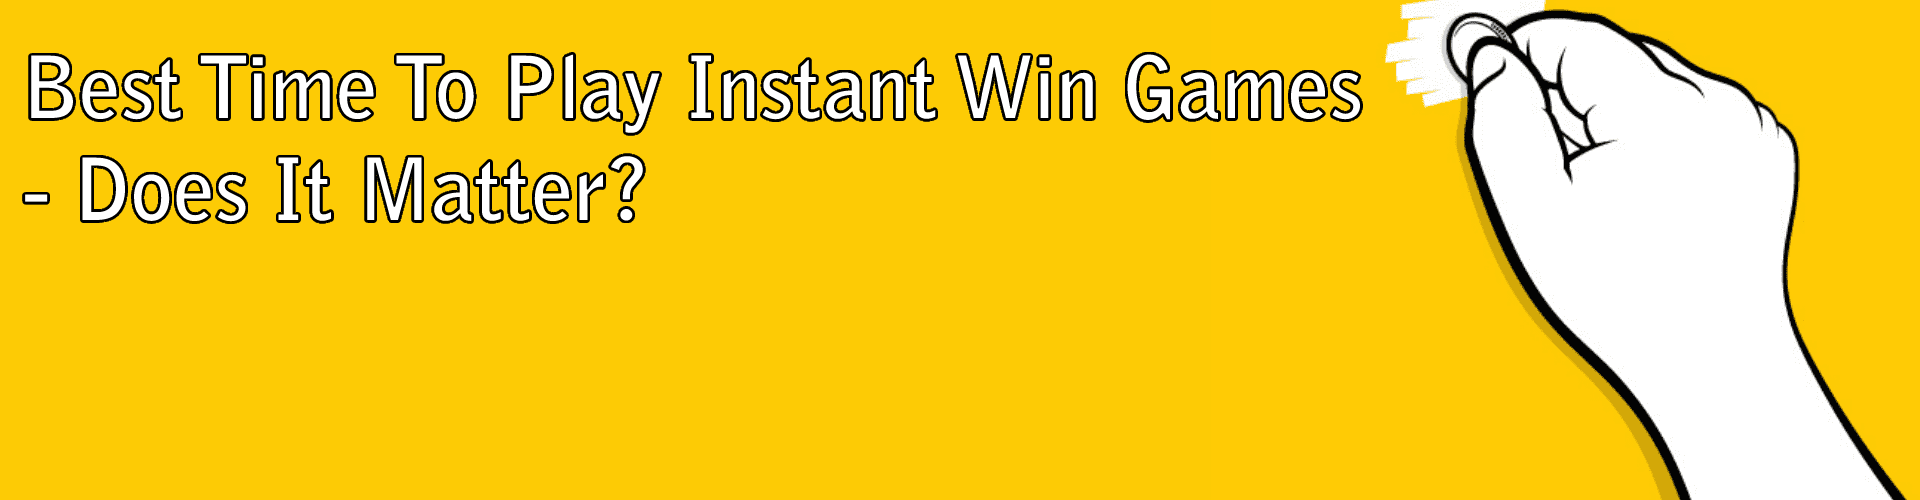 Best Time To Play Instant Win Games - Does It Matter?